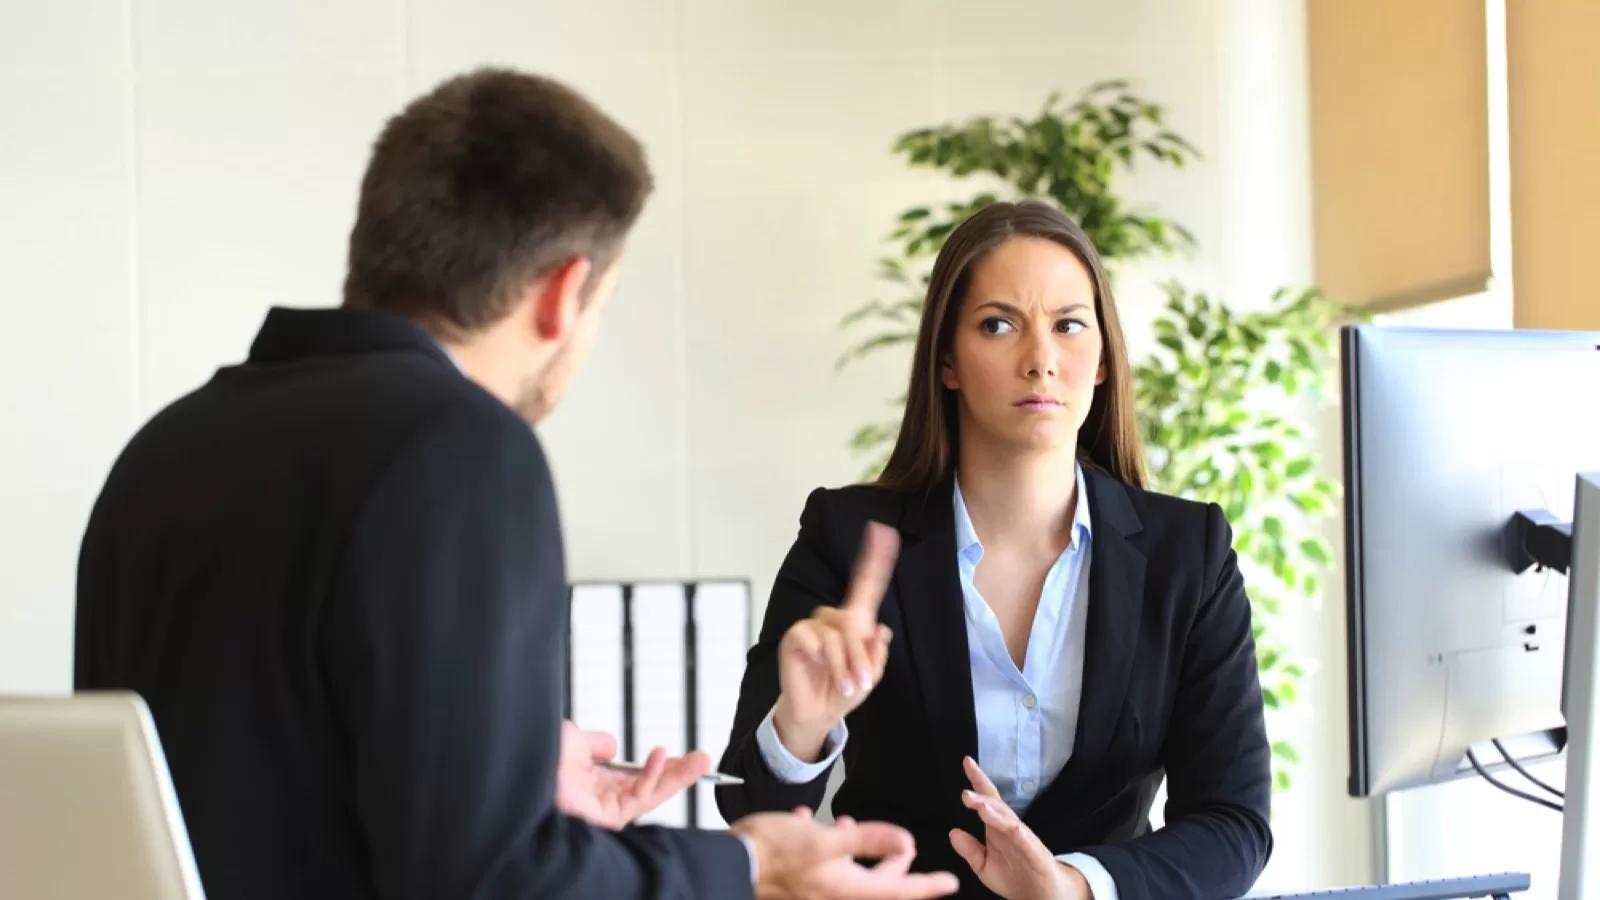 Boss deny something in interview